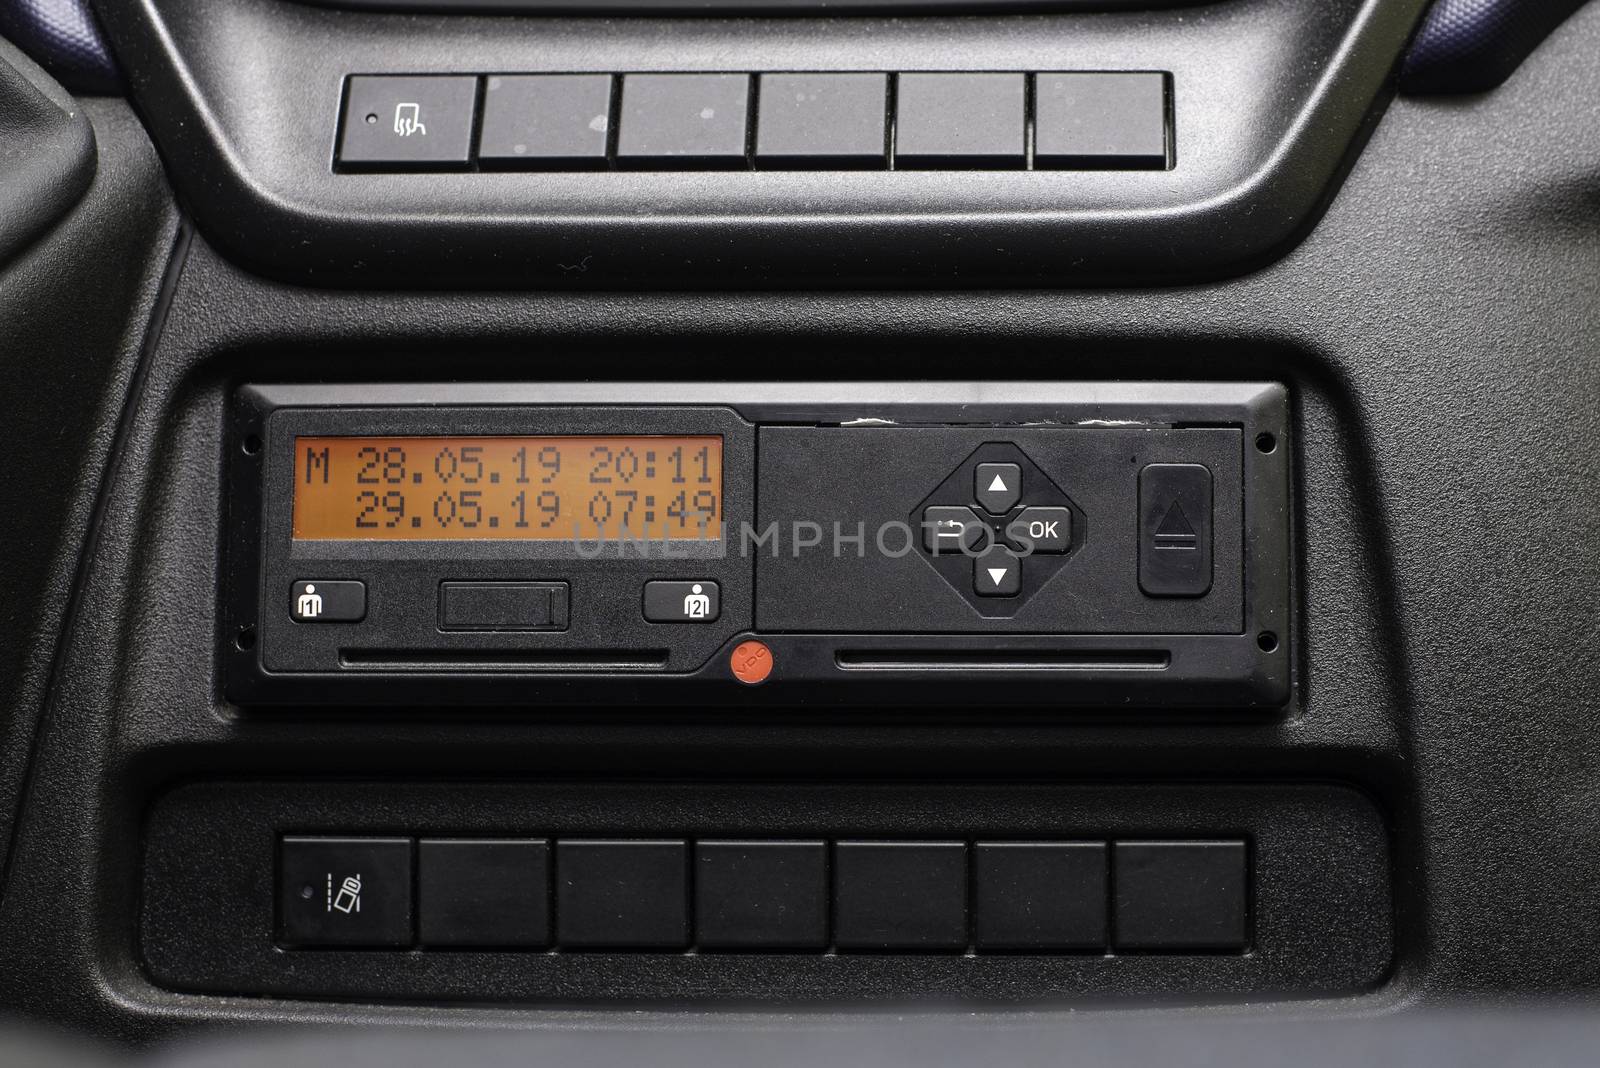 Digital tachograph display shows time difference after driver inserts the card into the device when starting shift. No personal data. Tachograph in a van.